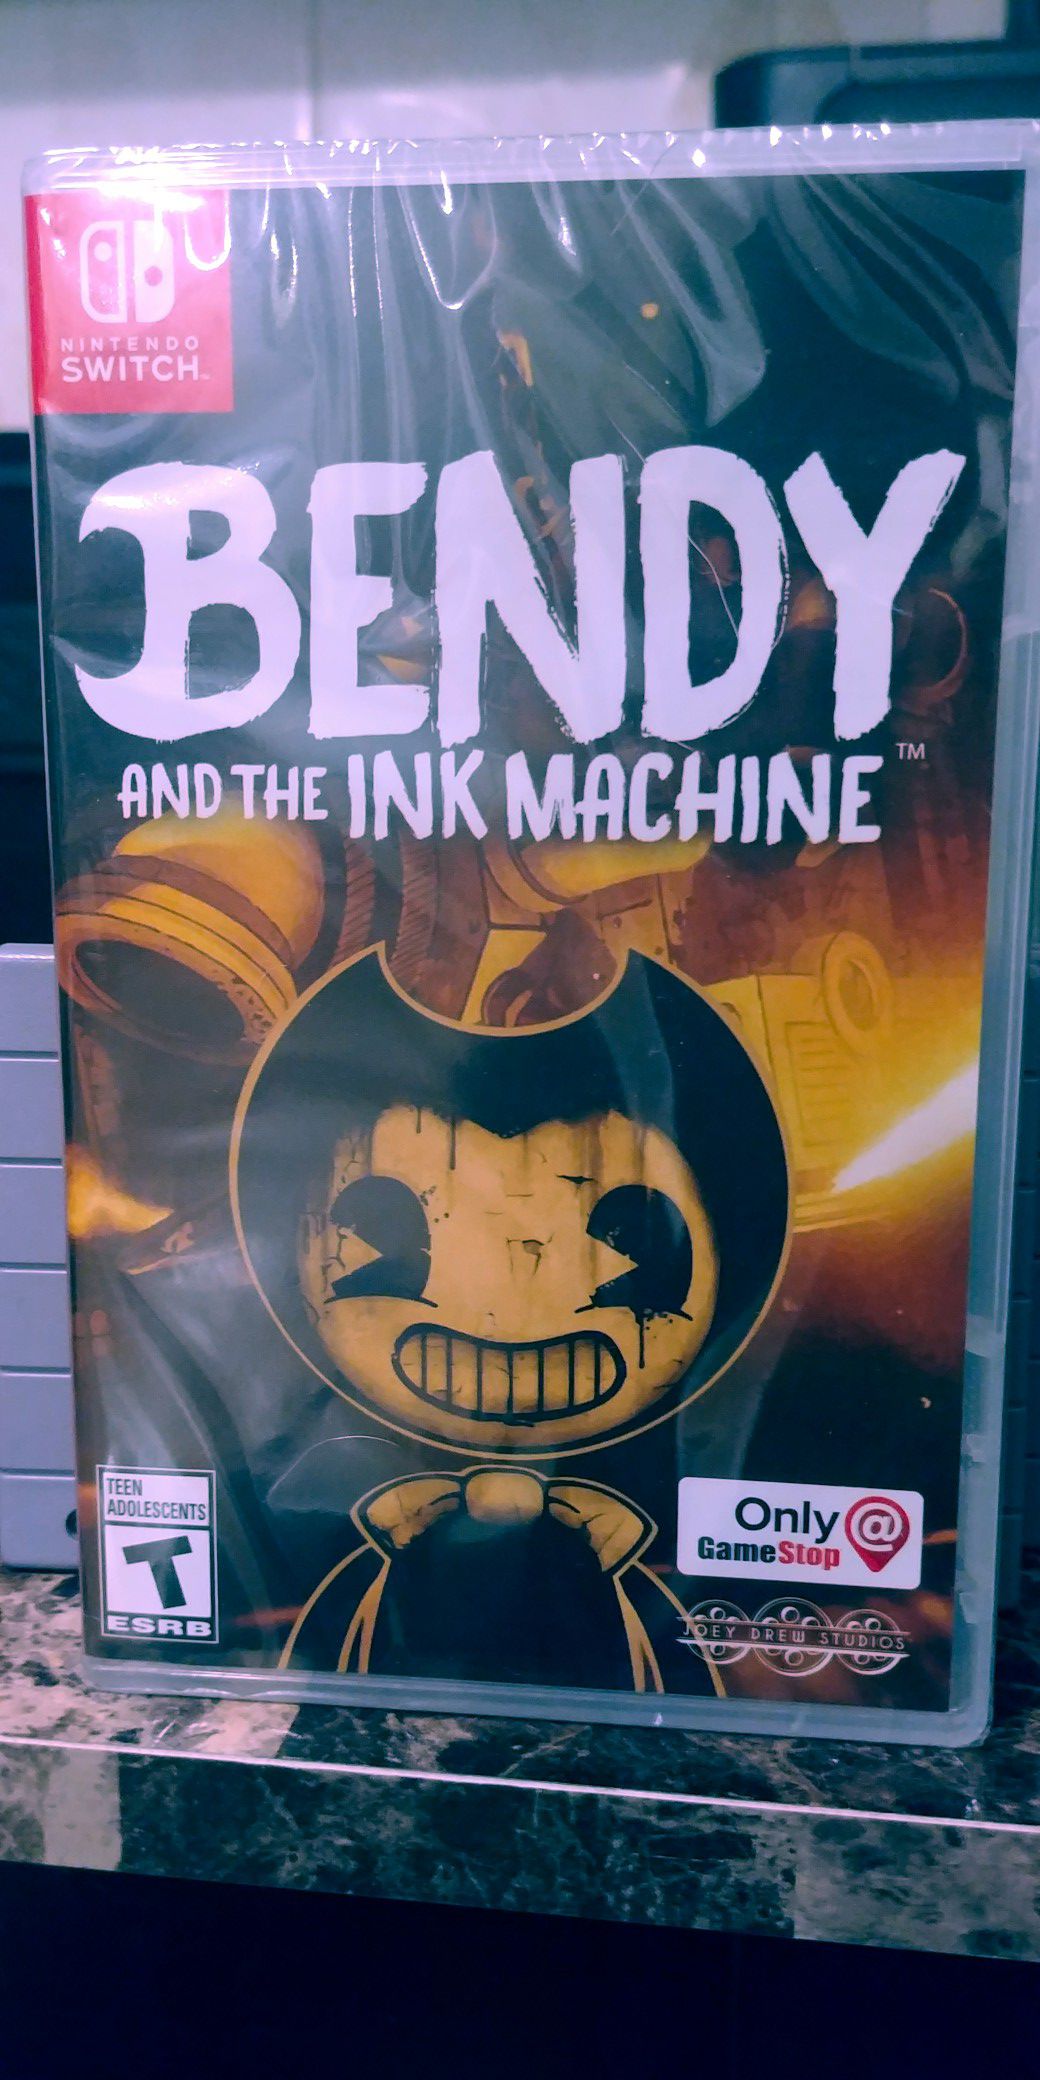 Bendy And The Ink Machine Available Exclusively At GameStop – NintendoSoup